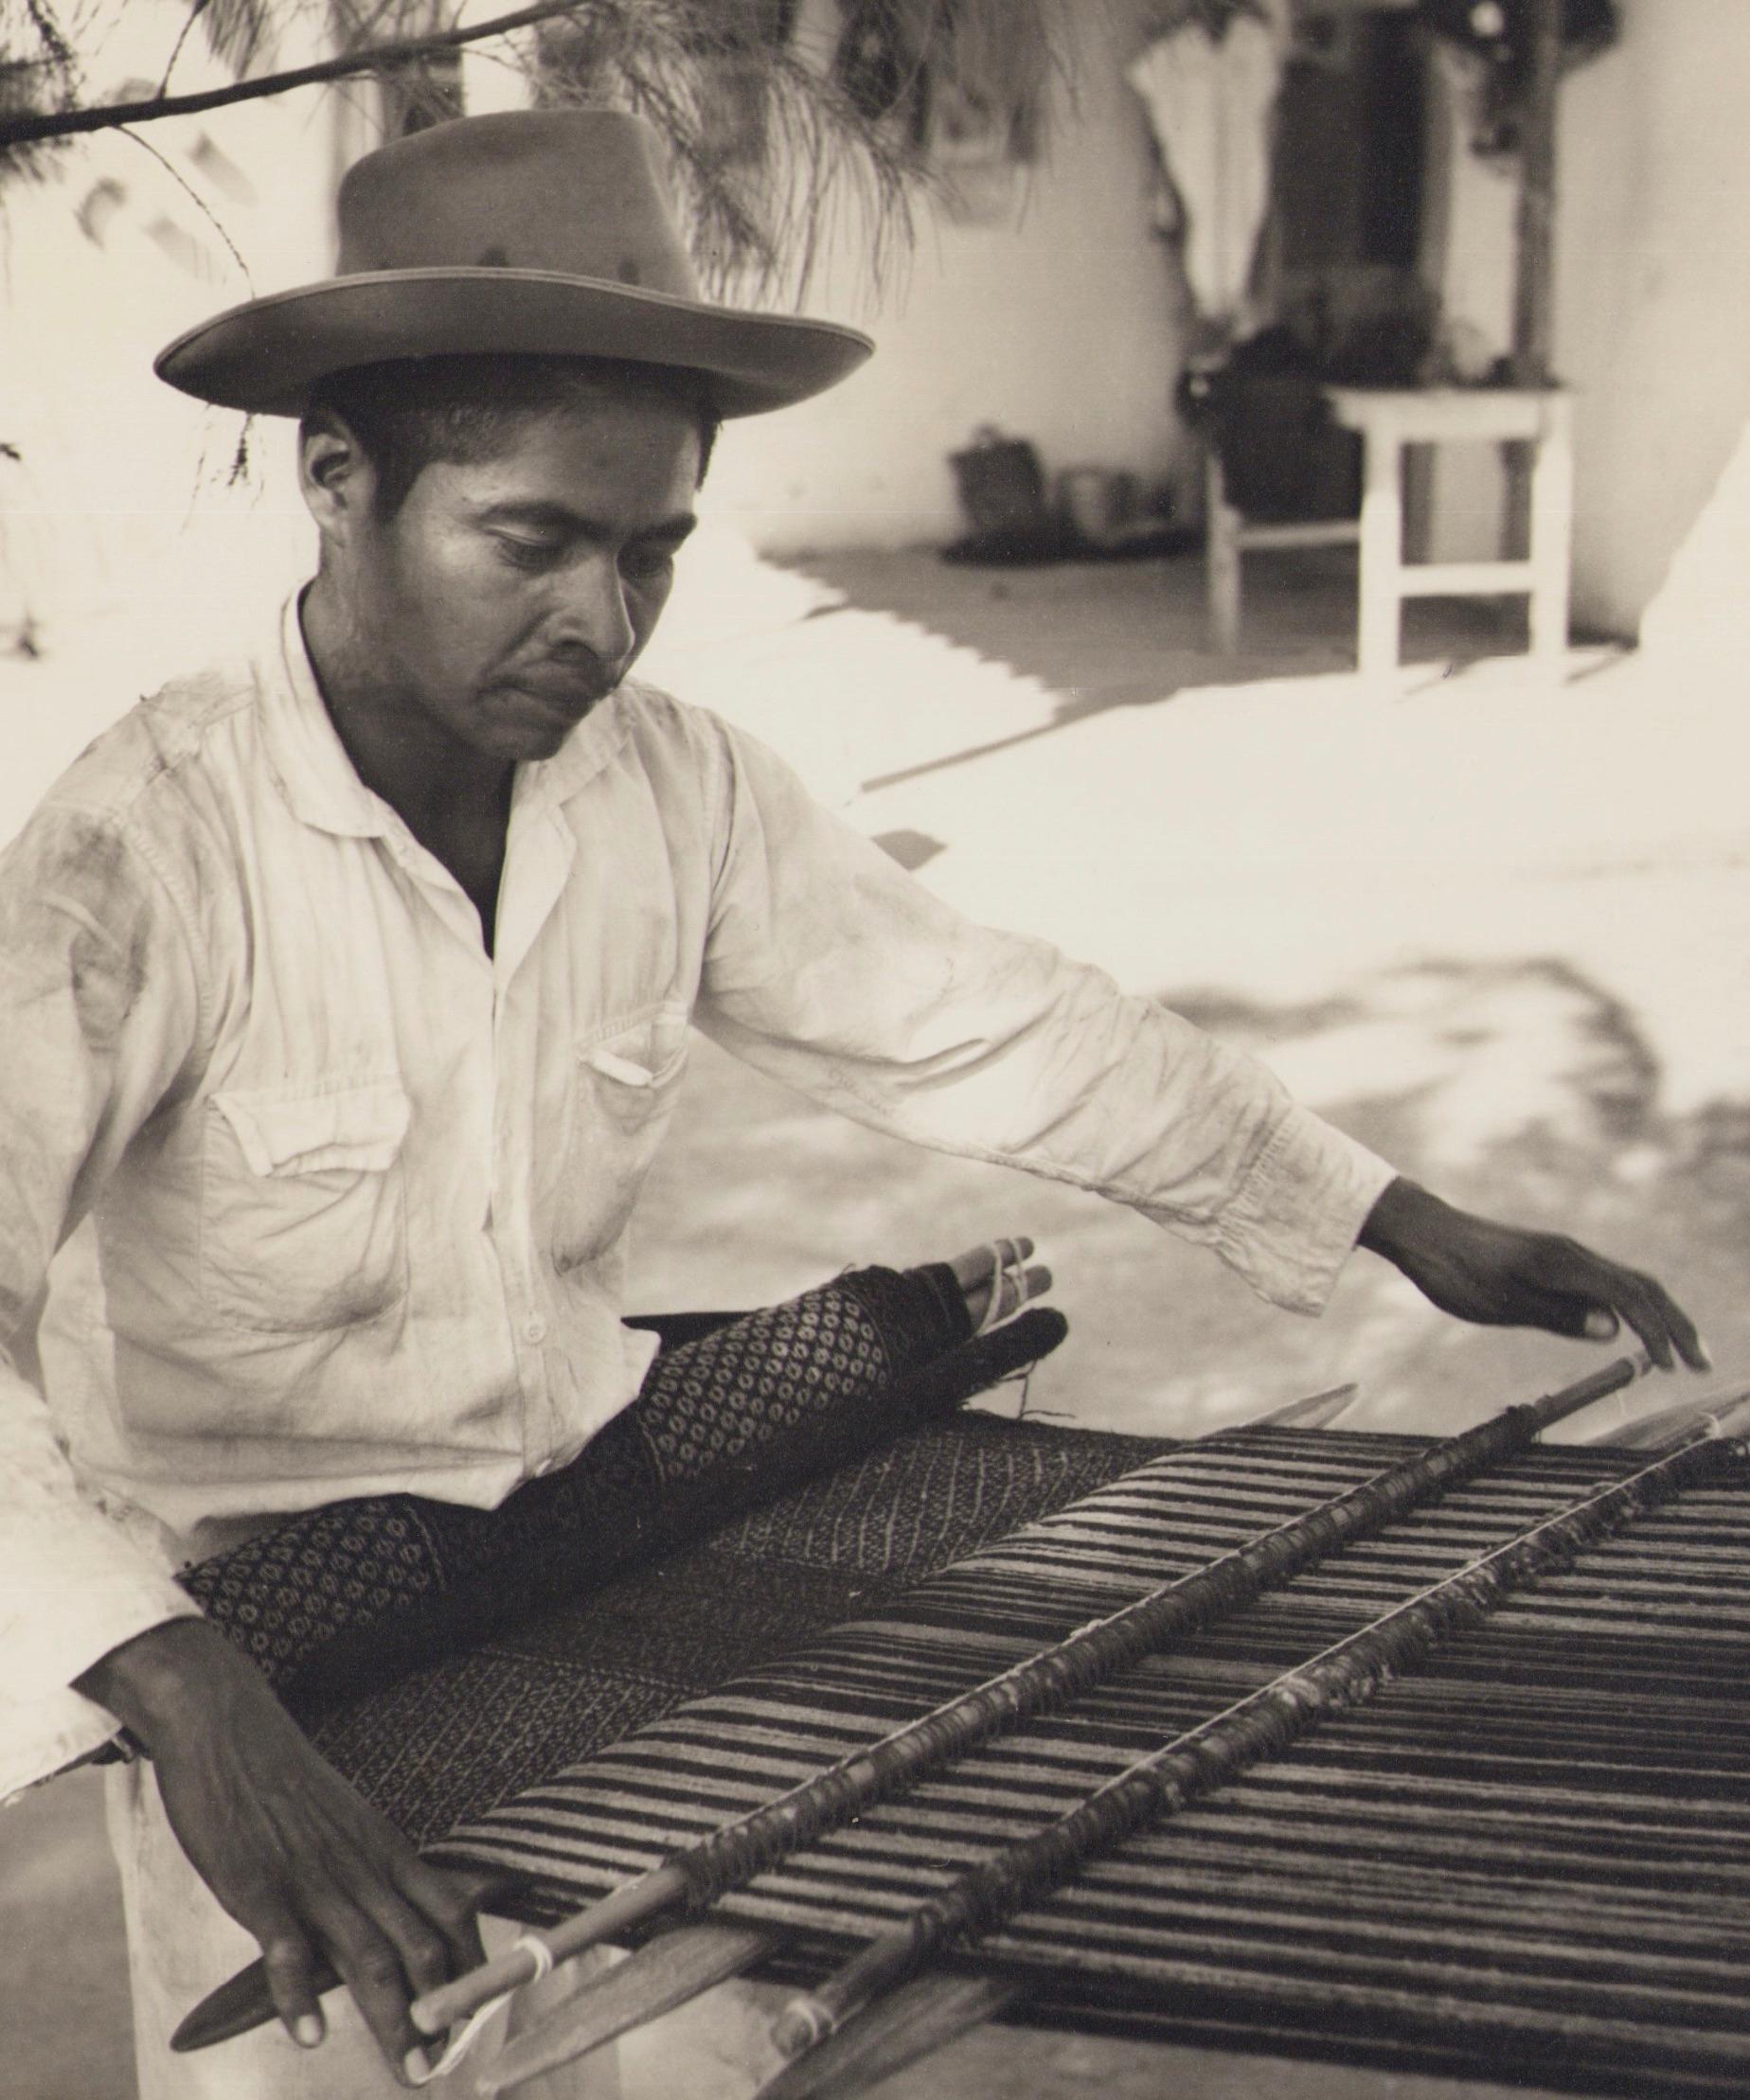 Mexico, Man, Handcraft, Black and White Photography, 1960s, 24, 2 x 24 cm For Sale 1